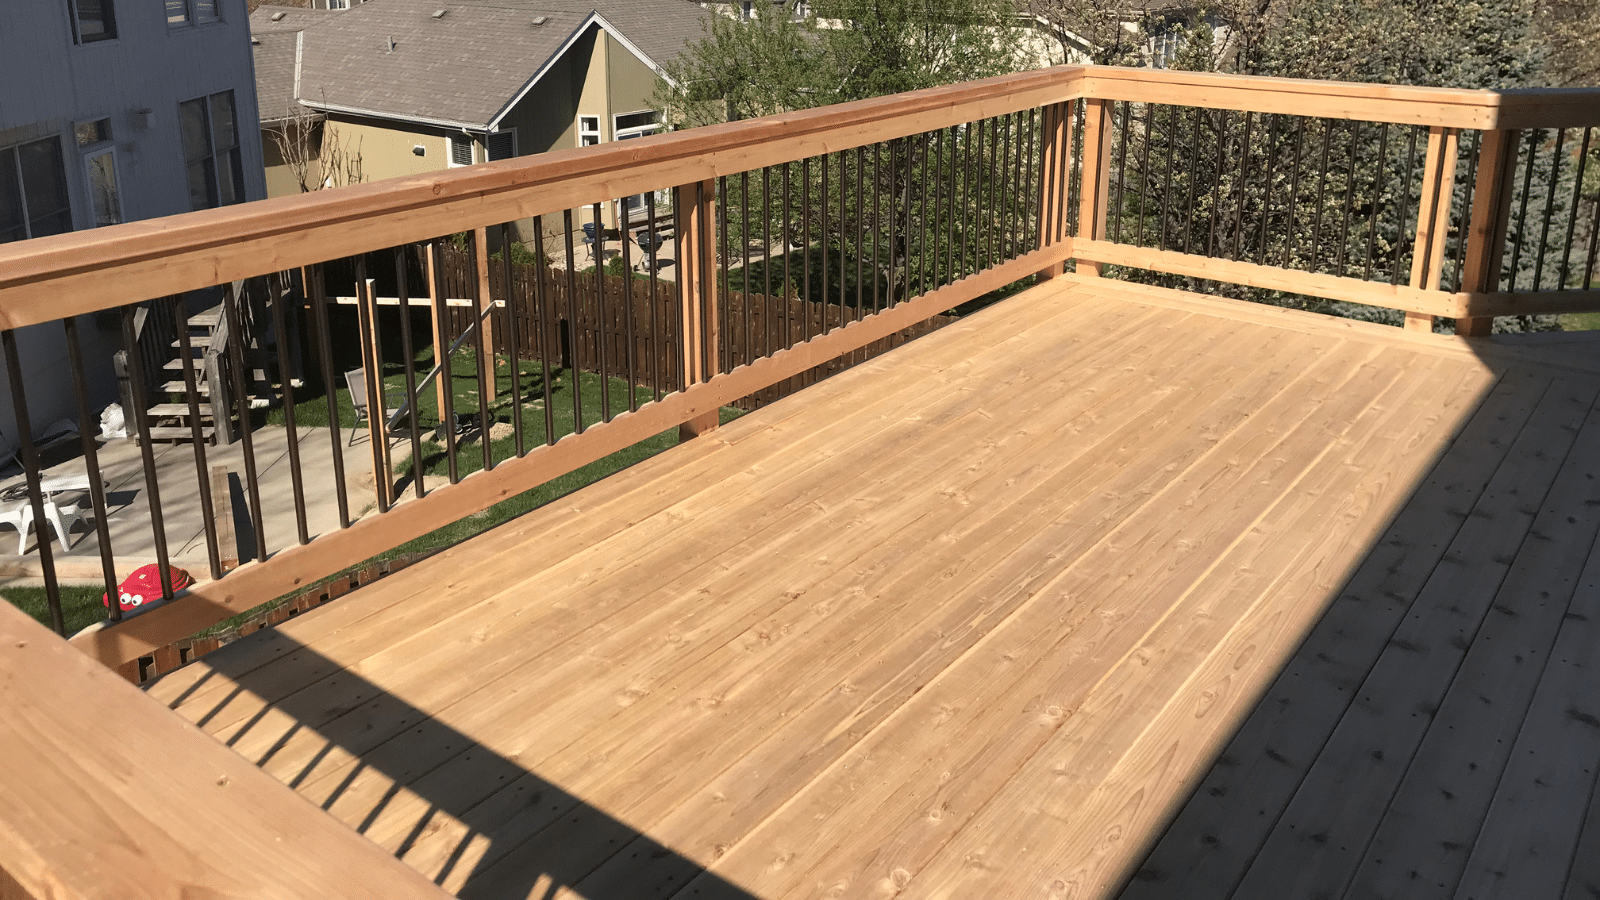 Treated Lumber vs. Cedar: Choosing the Right Material for Your Deck